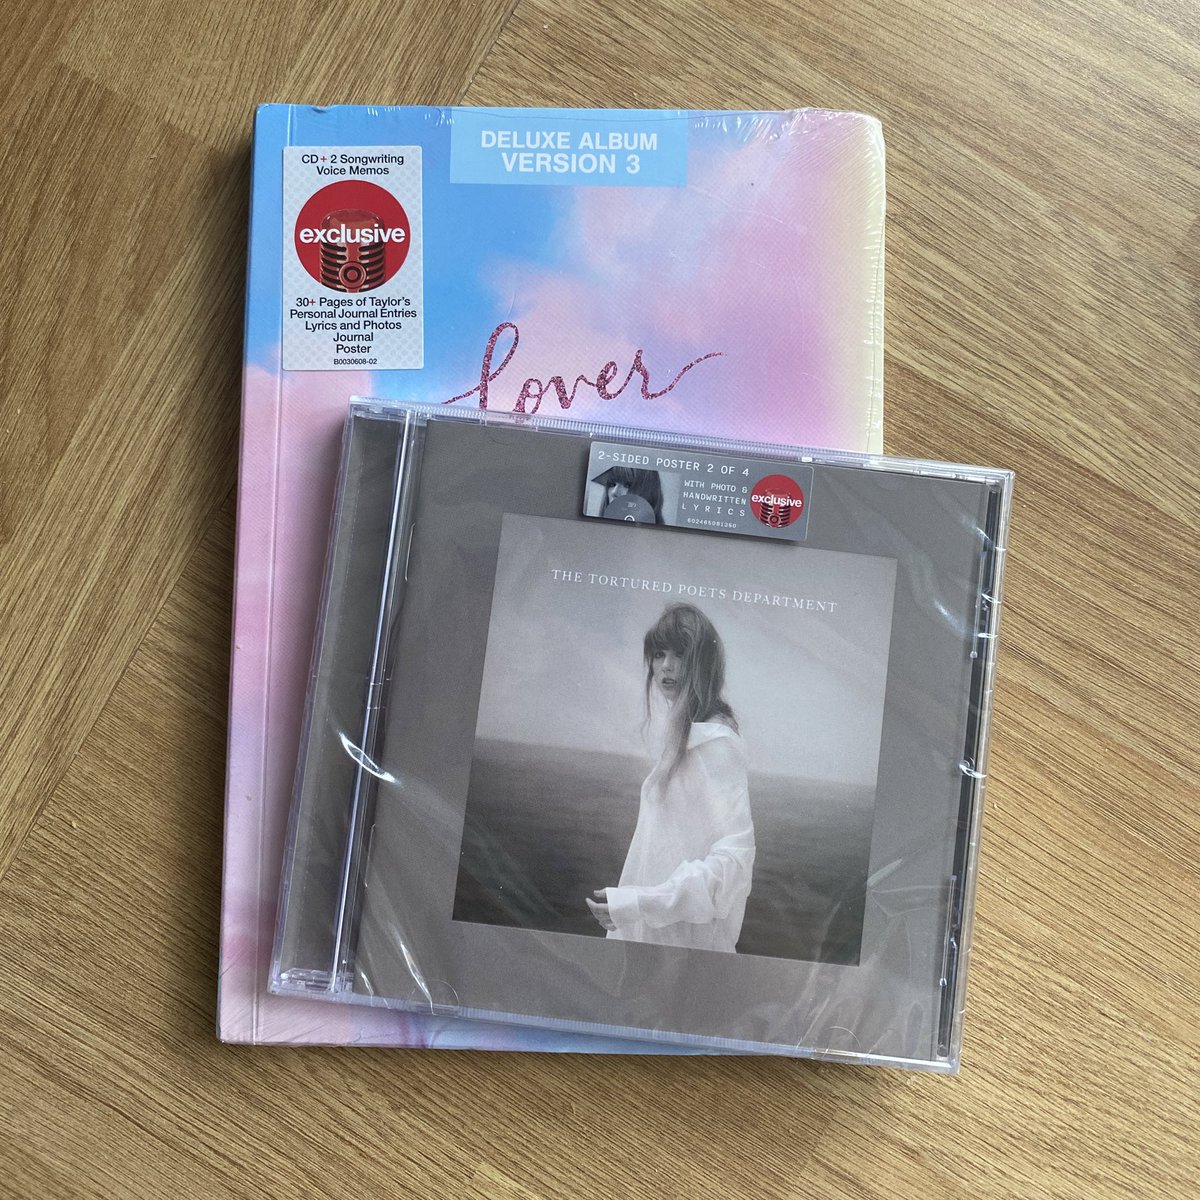 HELLOOOO???? MY MUM BROUGHT ME BACK THE TARGET EXCLUSIVES??? I’VE WANTED THE LOVER JOURNALS SINCE 2019 😭😭😭😭